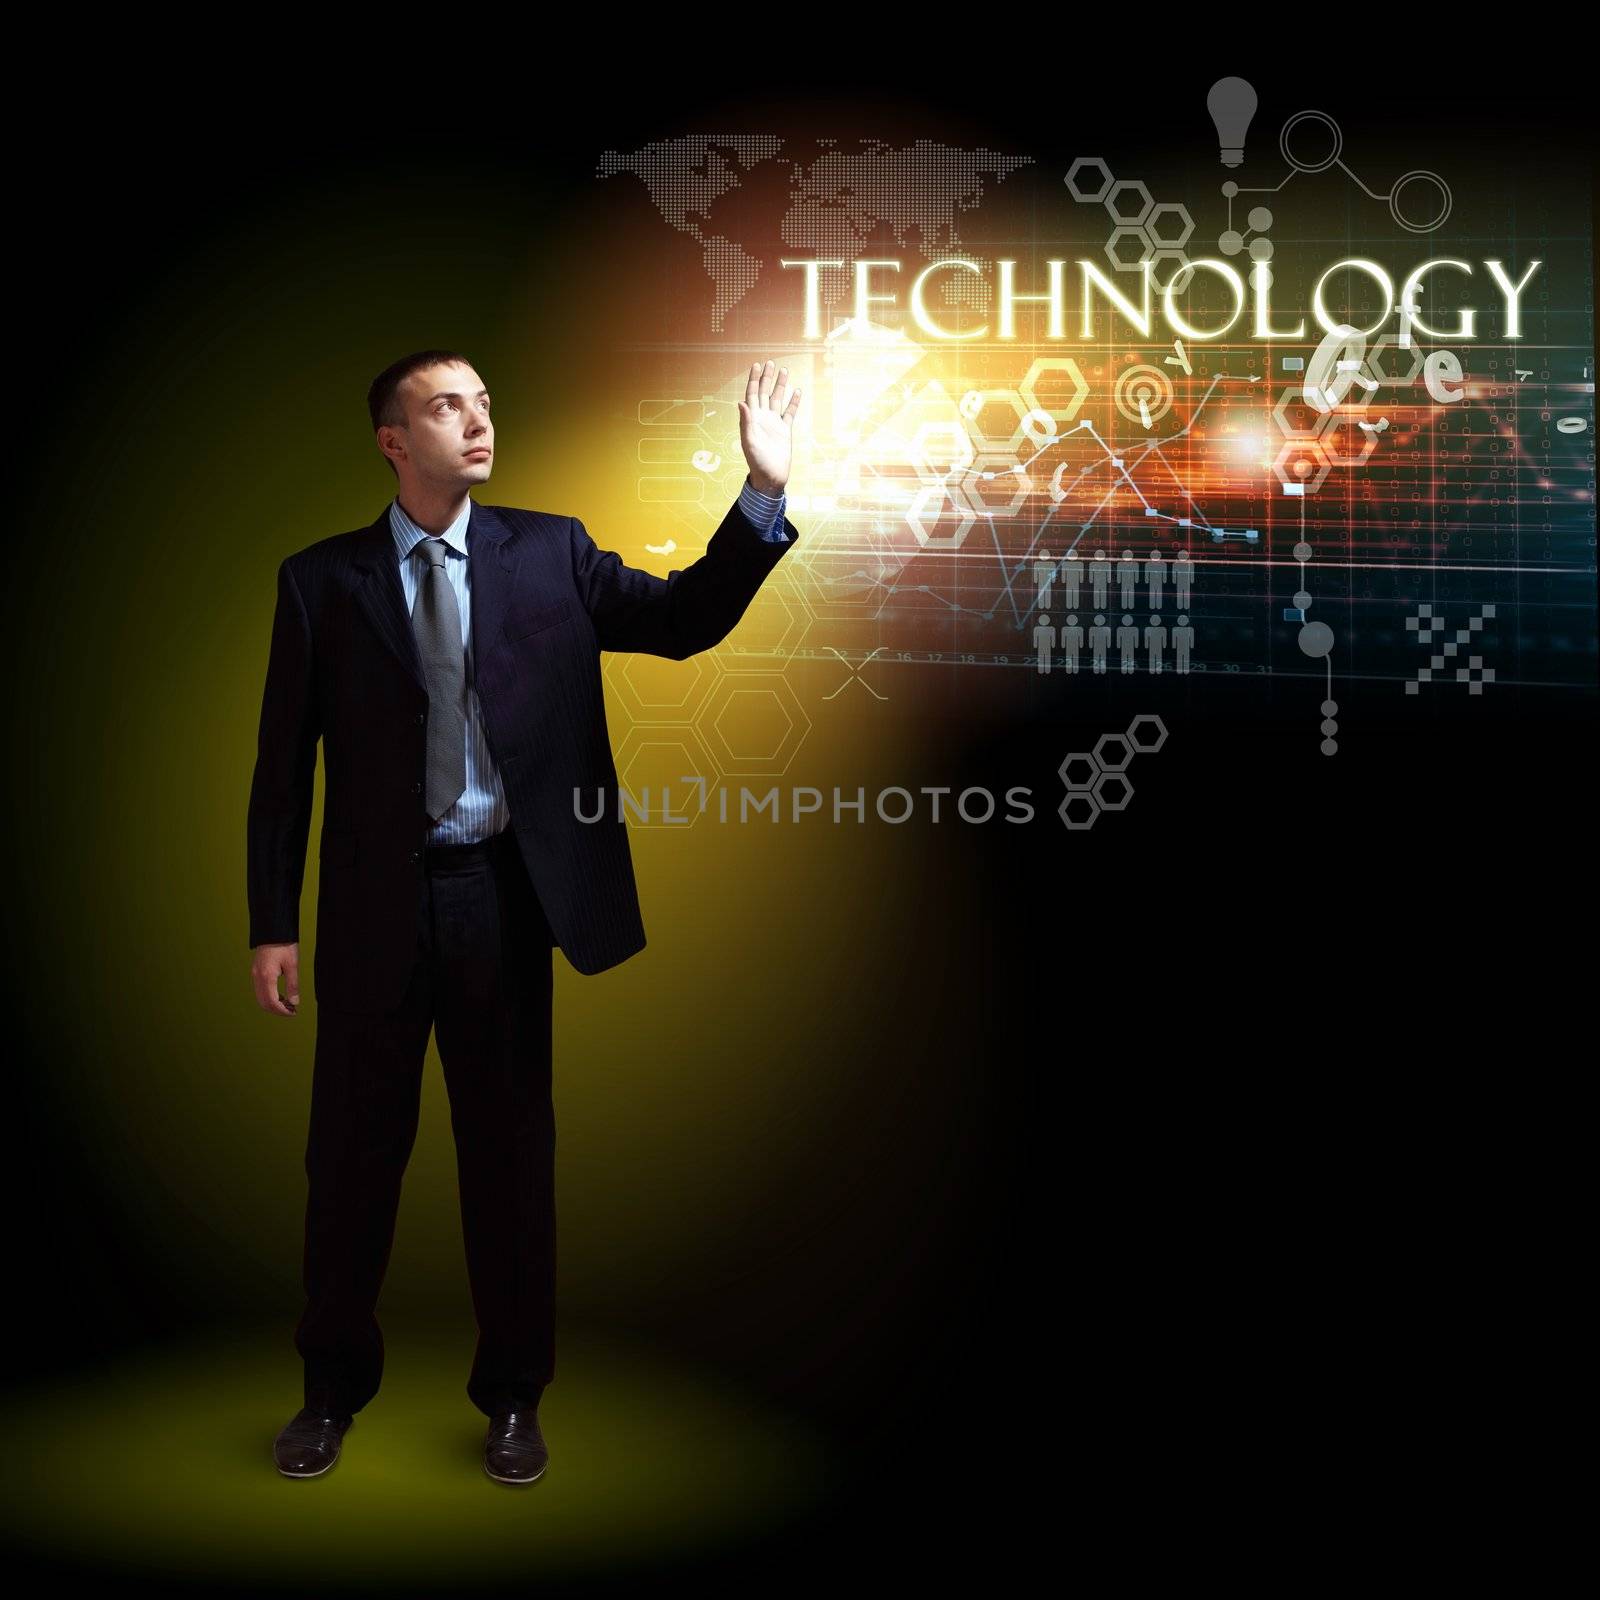 Modern technology in business by sergey_nivens